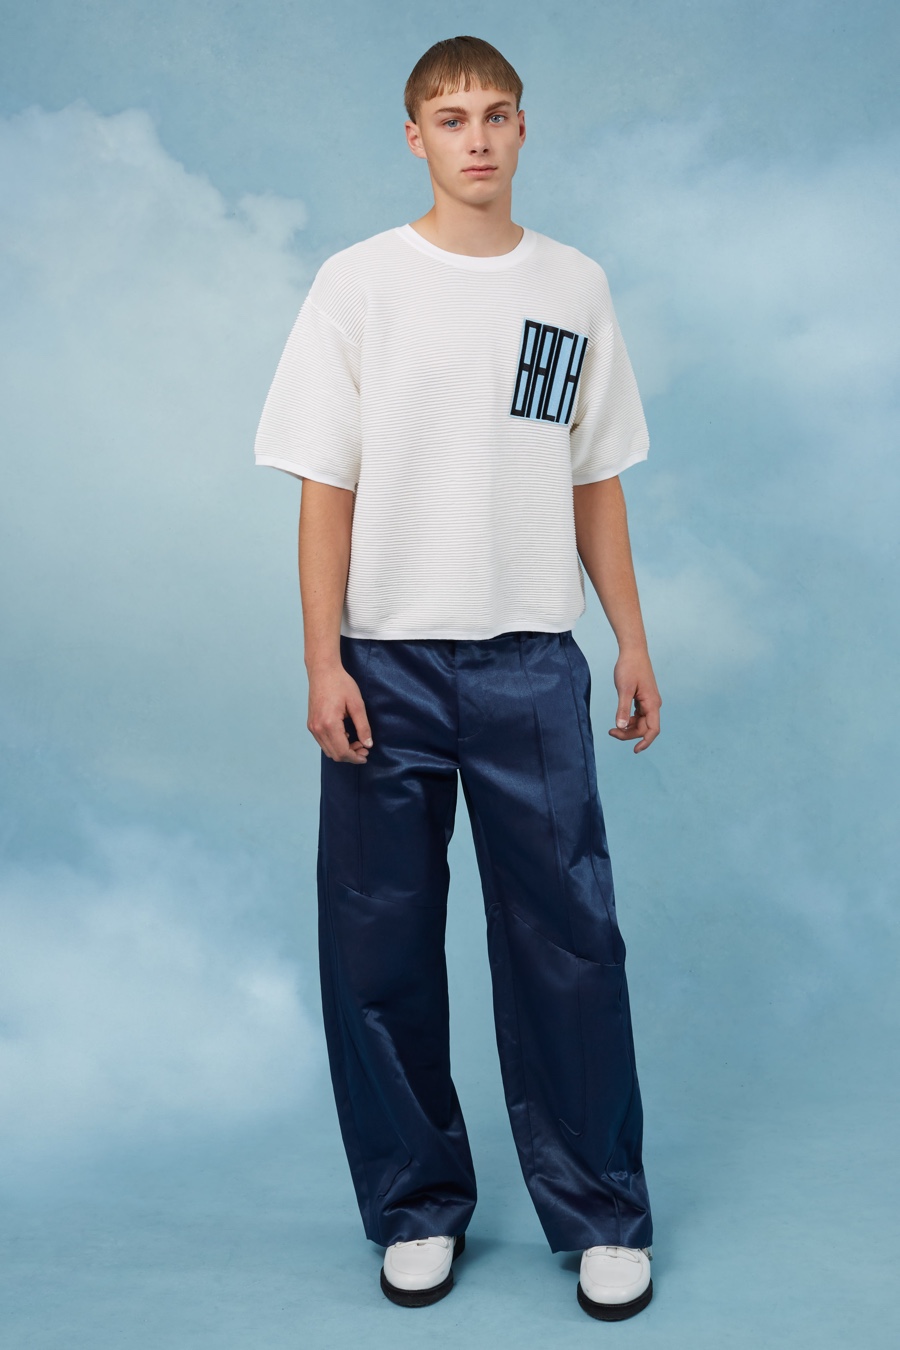 Opening Ceremony Spring/Summer 2016 Menswear Collection is a Teenage Dream